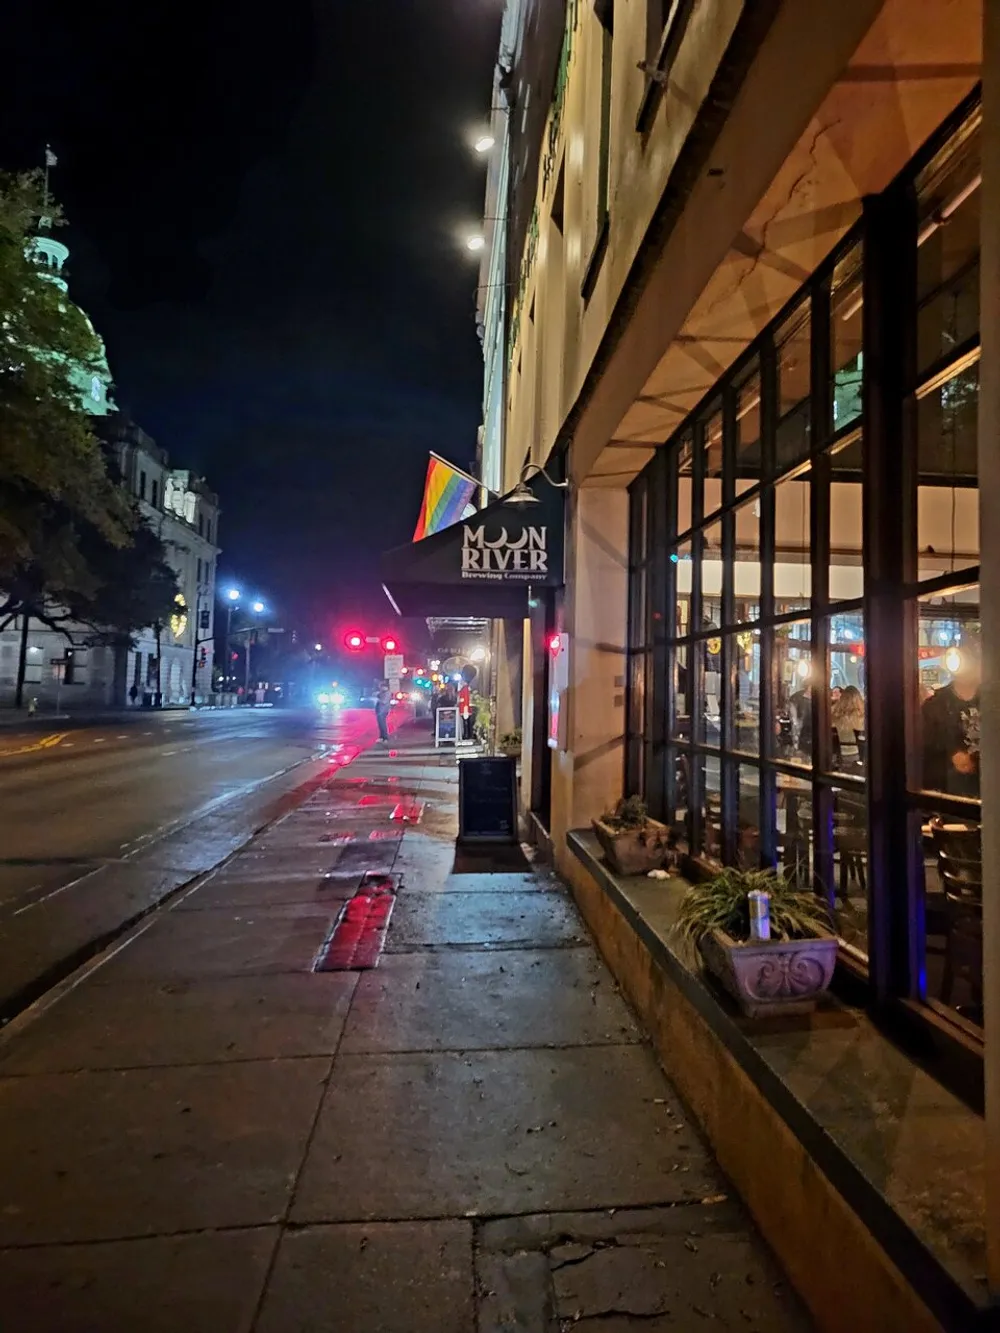 This image shows a city street at night with the exterior of the Moon River Brewing Company and a pride flag hanging above alongside illuminated windows and a view of the street receding into the distance with traffic lights and a glimpse of a historic buildings tower